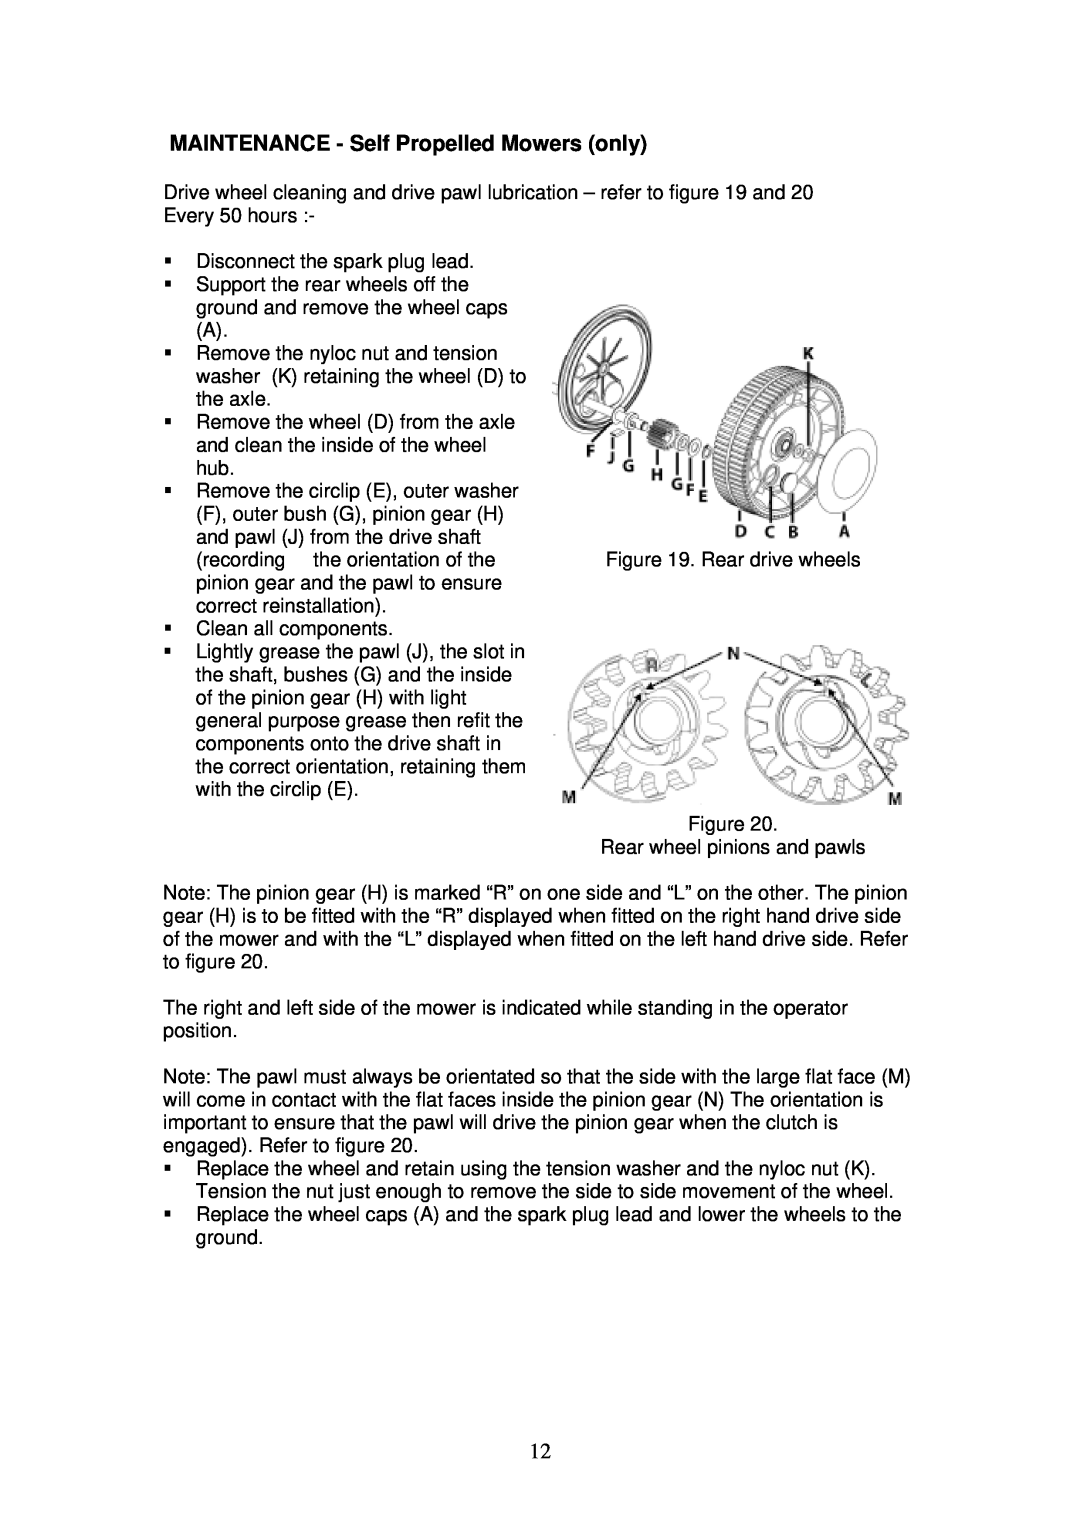 Rover 460 owner manual MAINTENANCE - Self Propelled Mowers only, ƒDisconnect the spark plug lead 